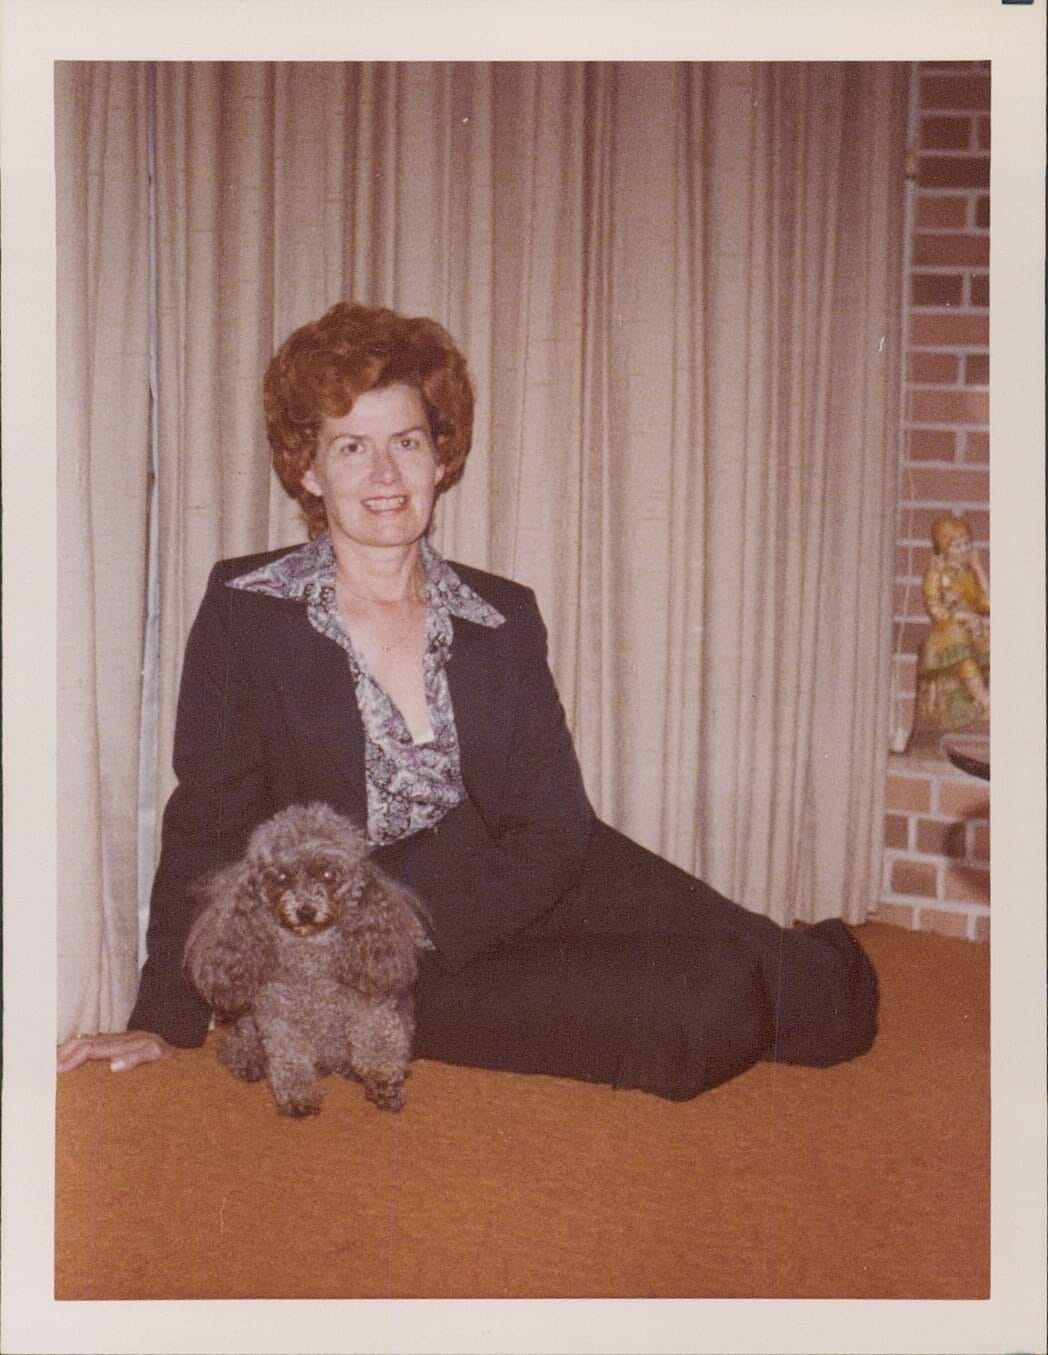 A women in a blue suit with red hair sitting on the floor with her toy poodle